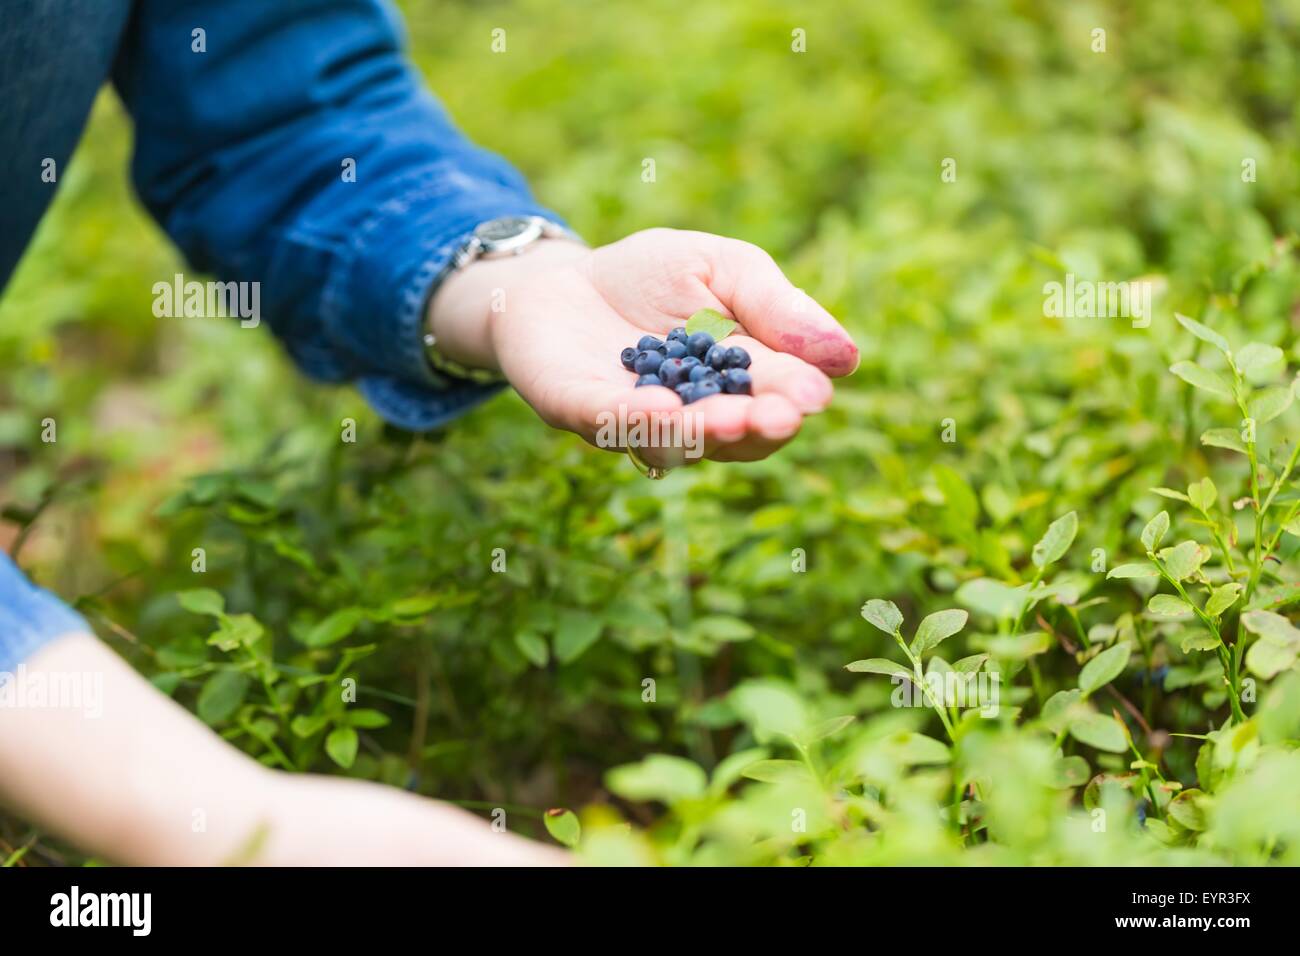 Blueberry bushes in the forest and woman hands picking blueberries. Close up of forest fruits Stock Photo